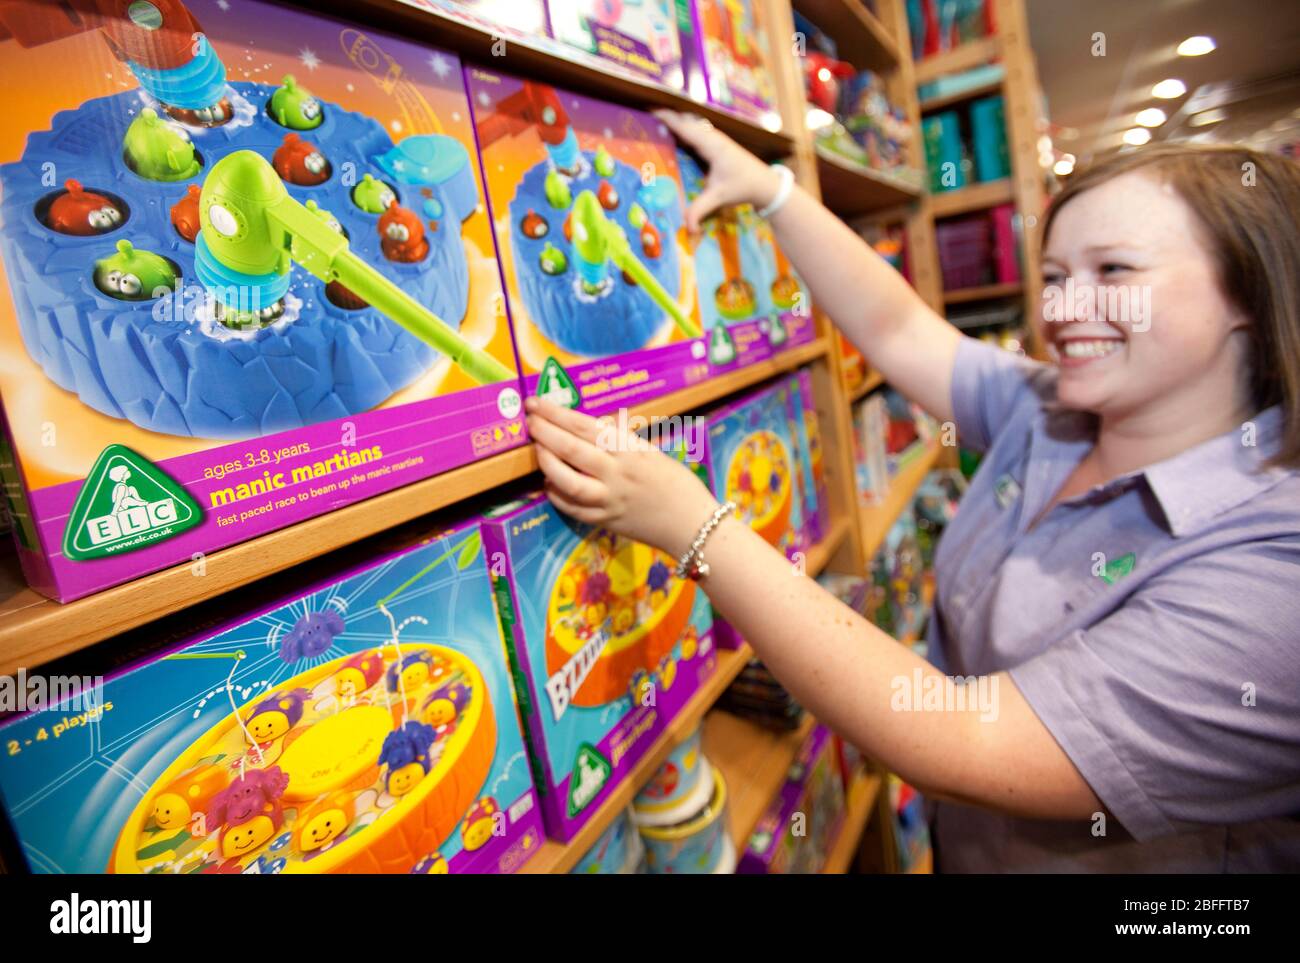 An Early Learning Centre employee tidies shelves on the shop floor, Kensington, London Stock Photo